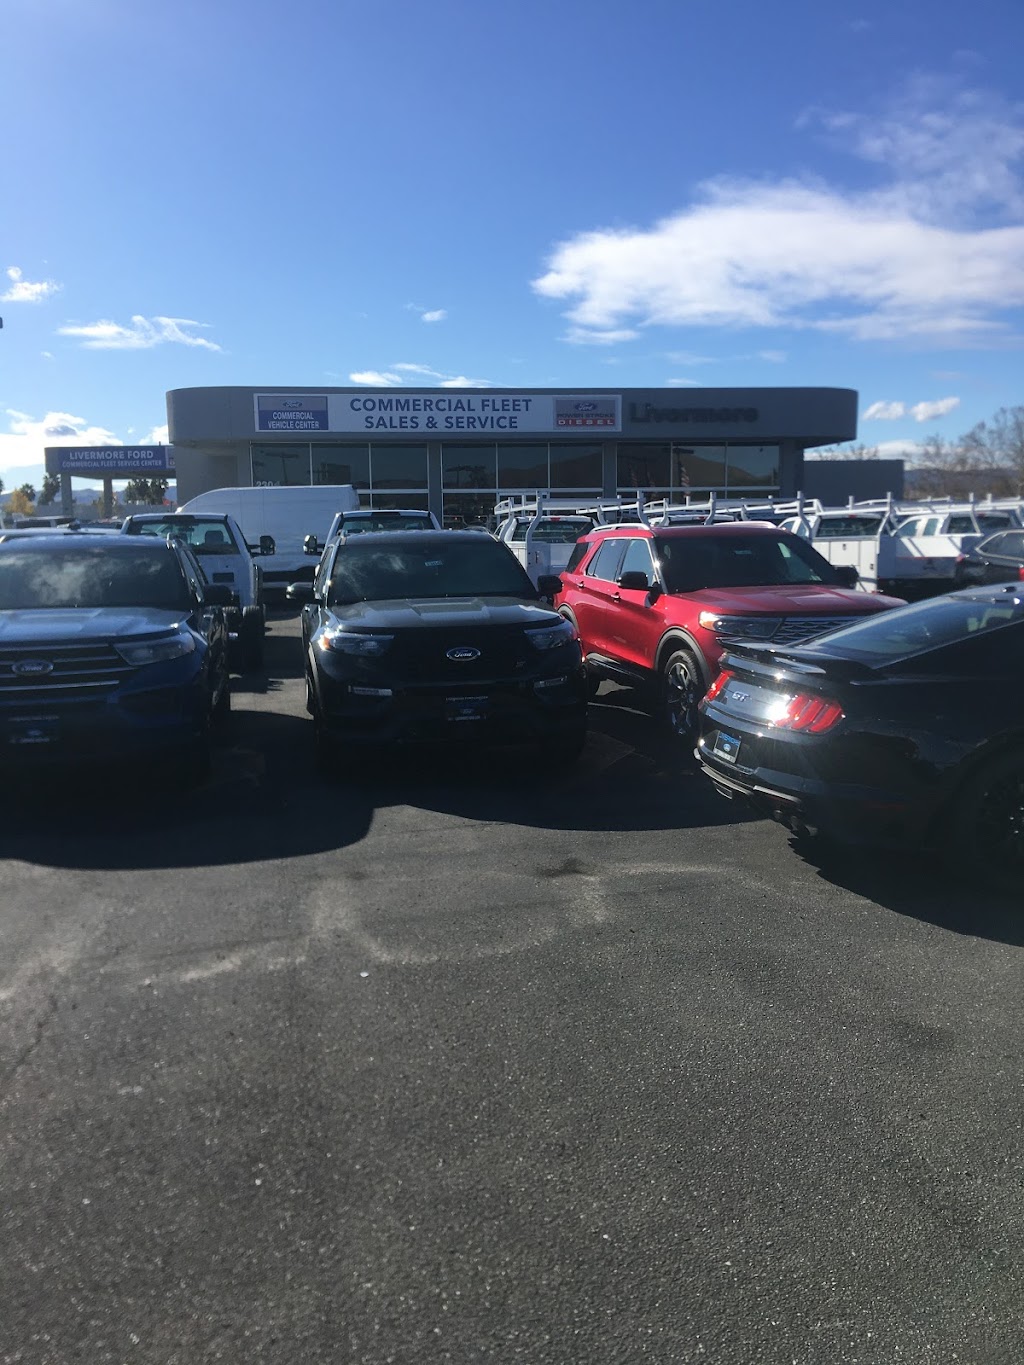 Livermore Ford Fleet Commercial Sales & Service | 2304 Kitty Hawk Rd, Livermore, CA 94551 | Phone: (209) 312-2214